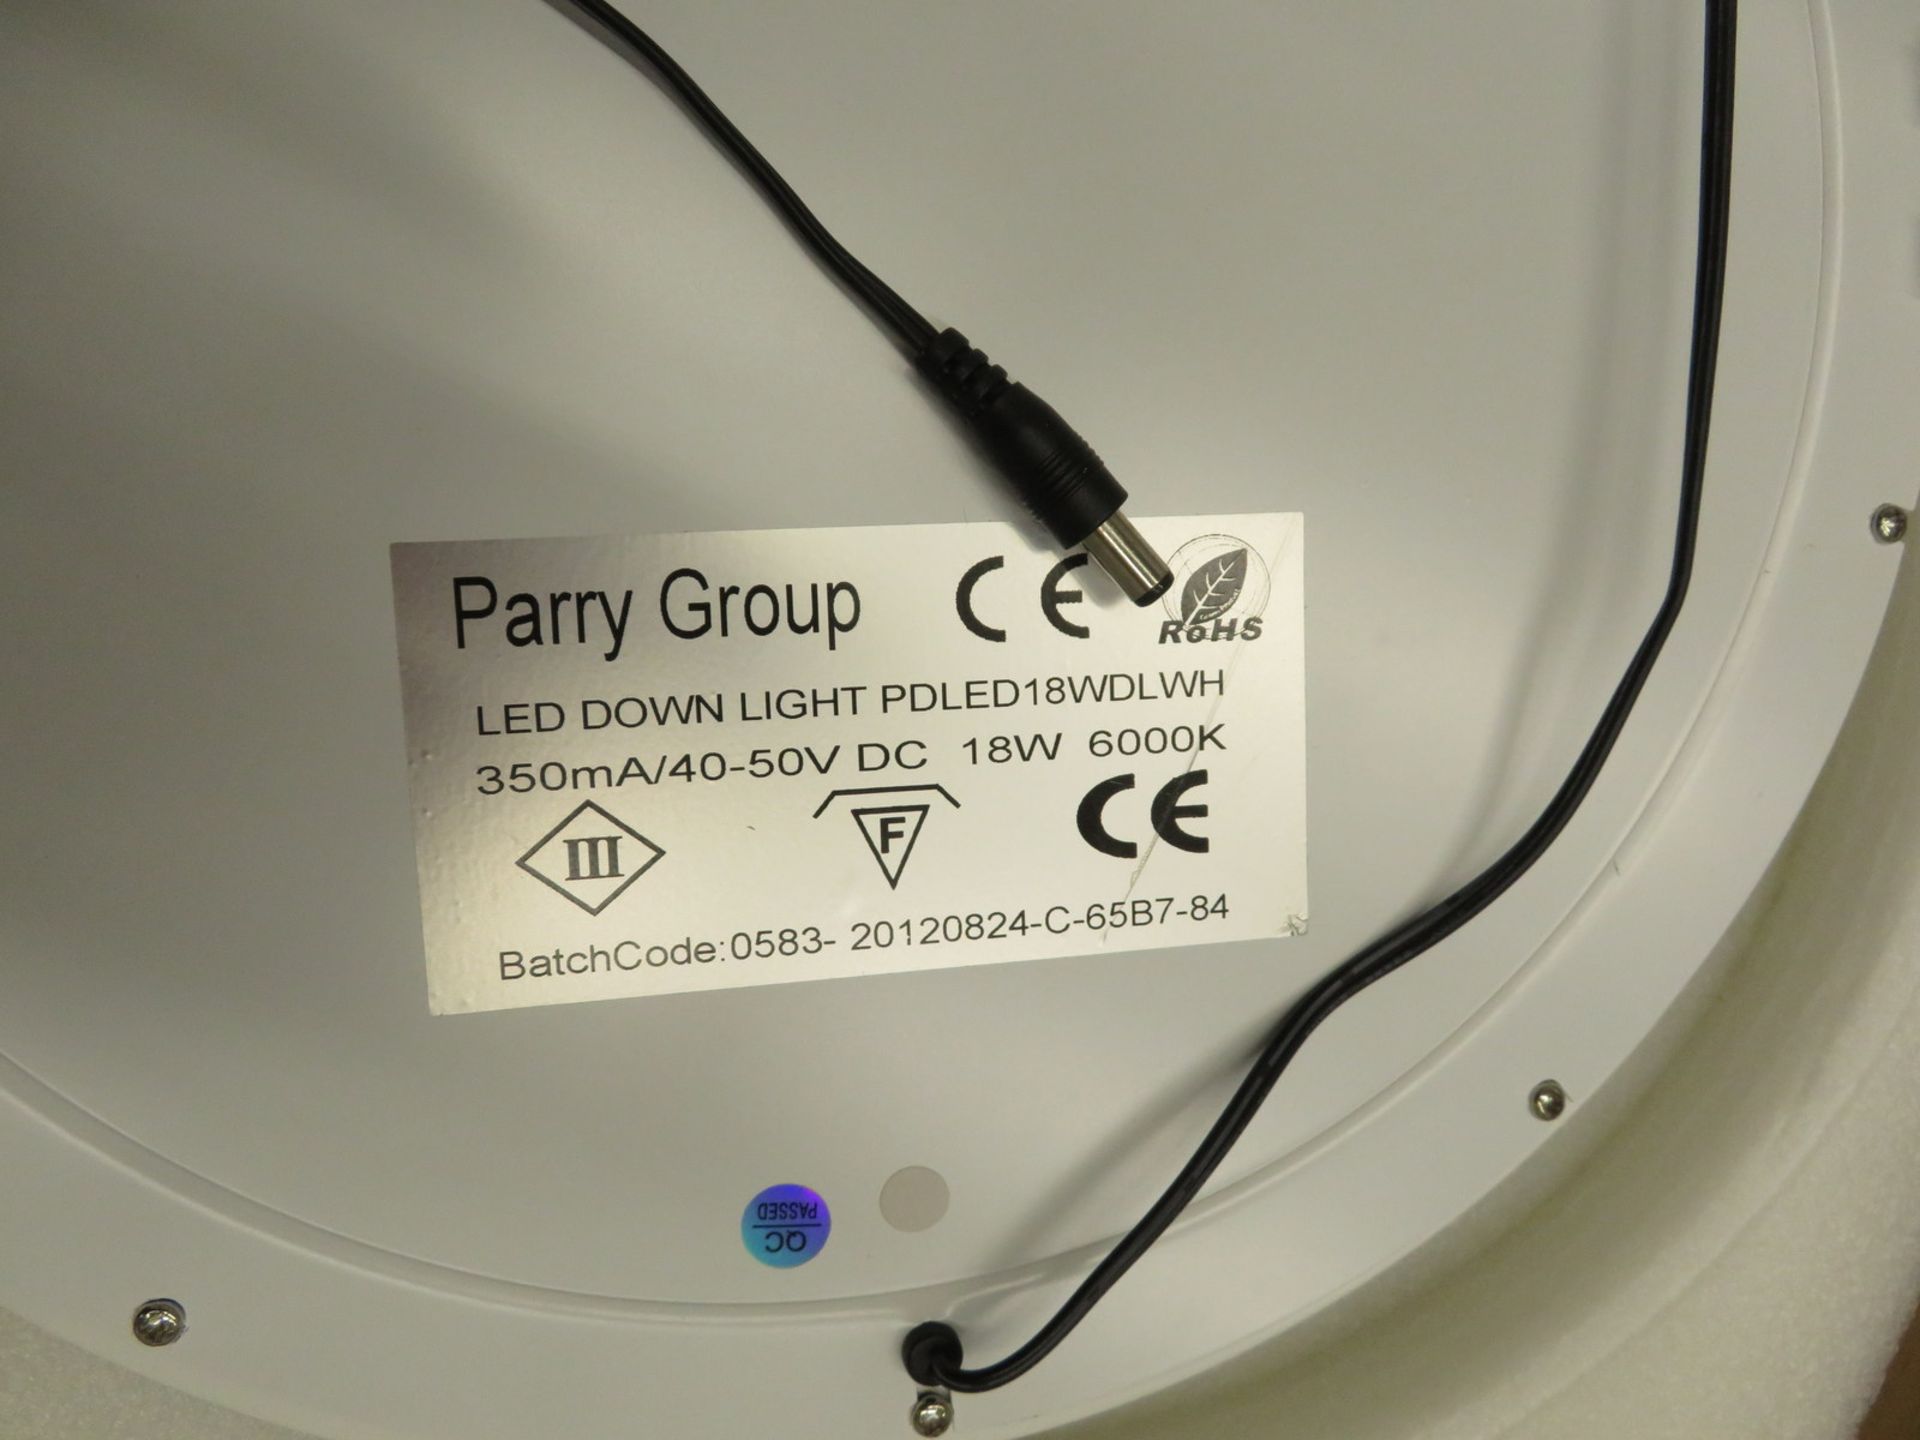 10x Parry PDLED 18WDL White LED down downlight 300x12mm - Image 4 of 4